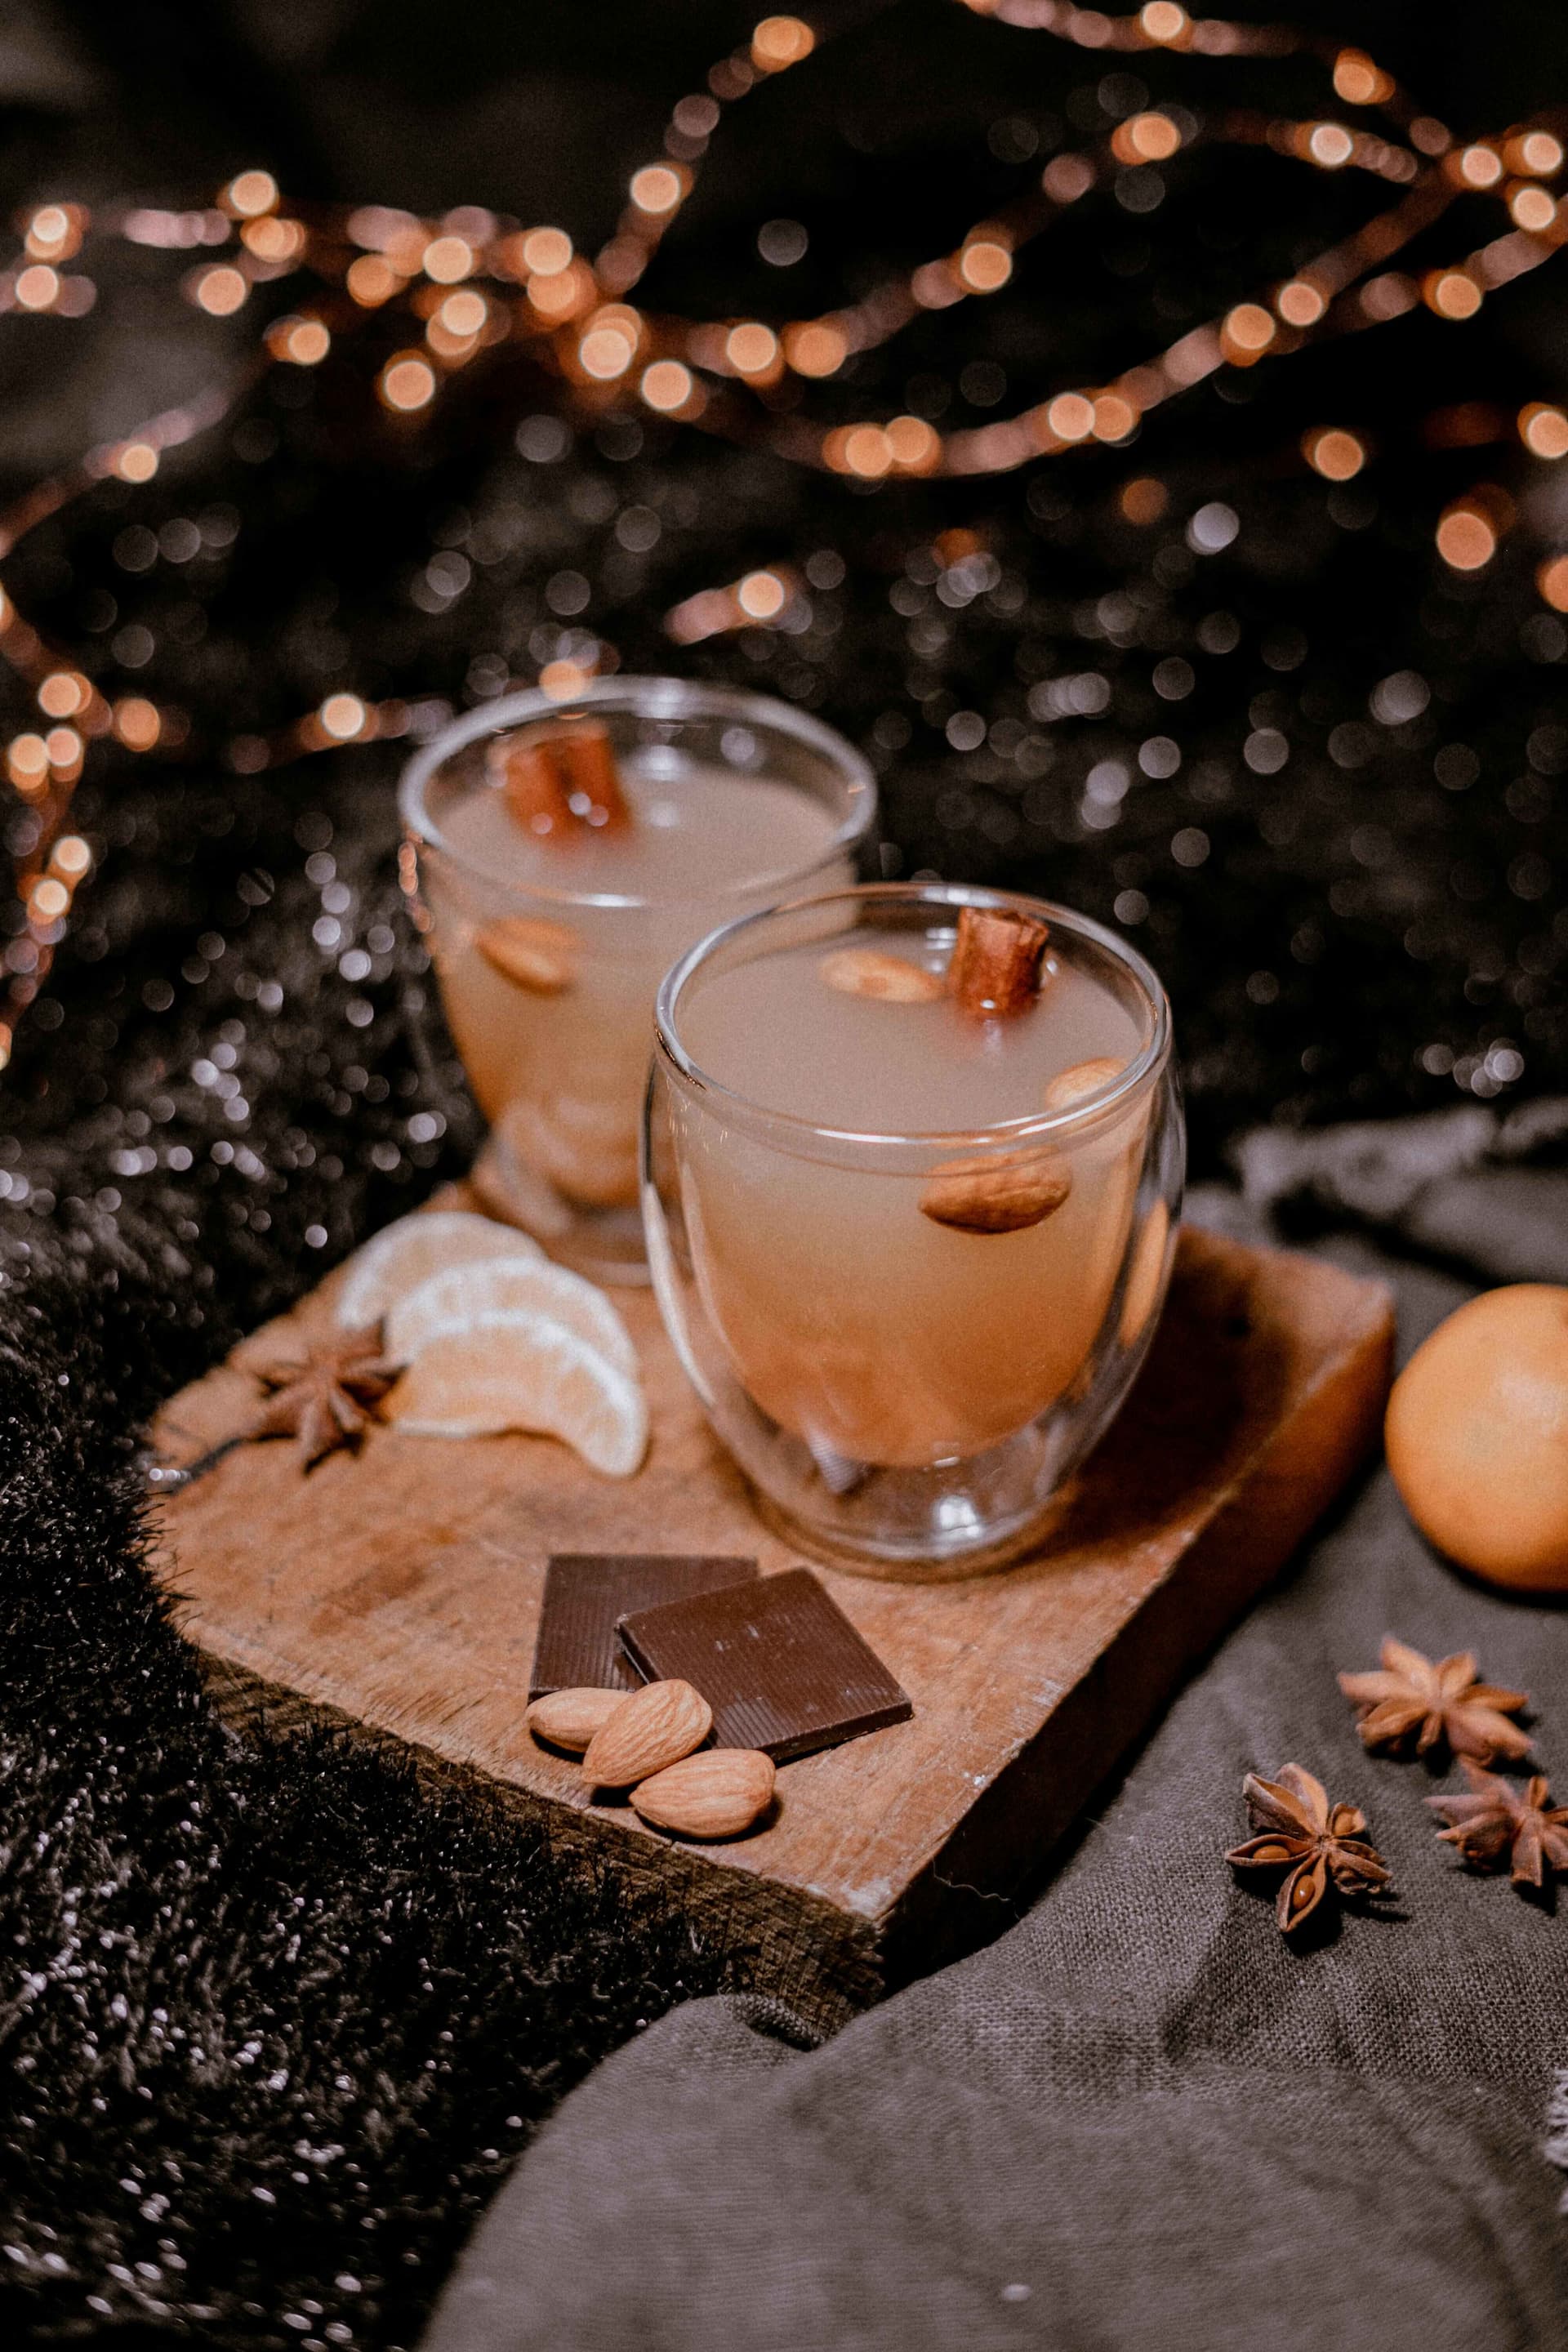 How To Make Almond Joy Martini Cocktail: A Sweet and Nutty Delight